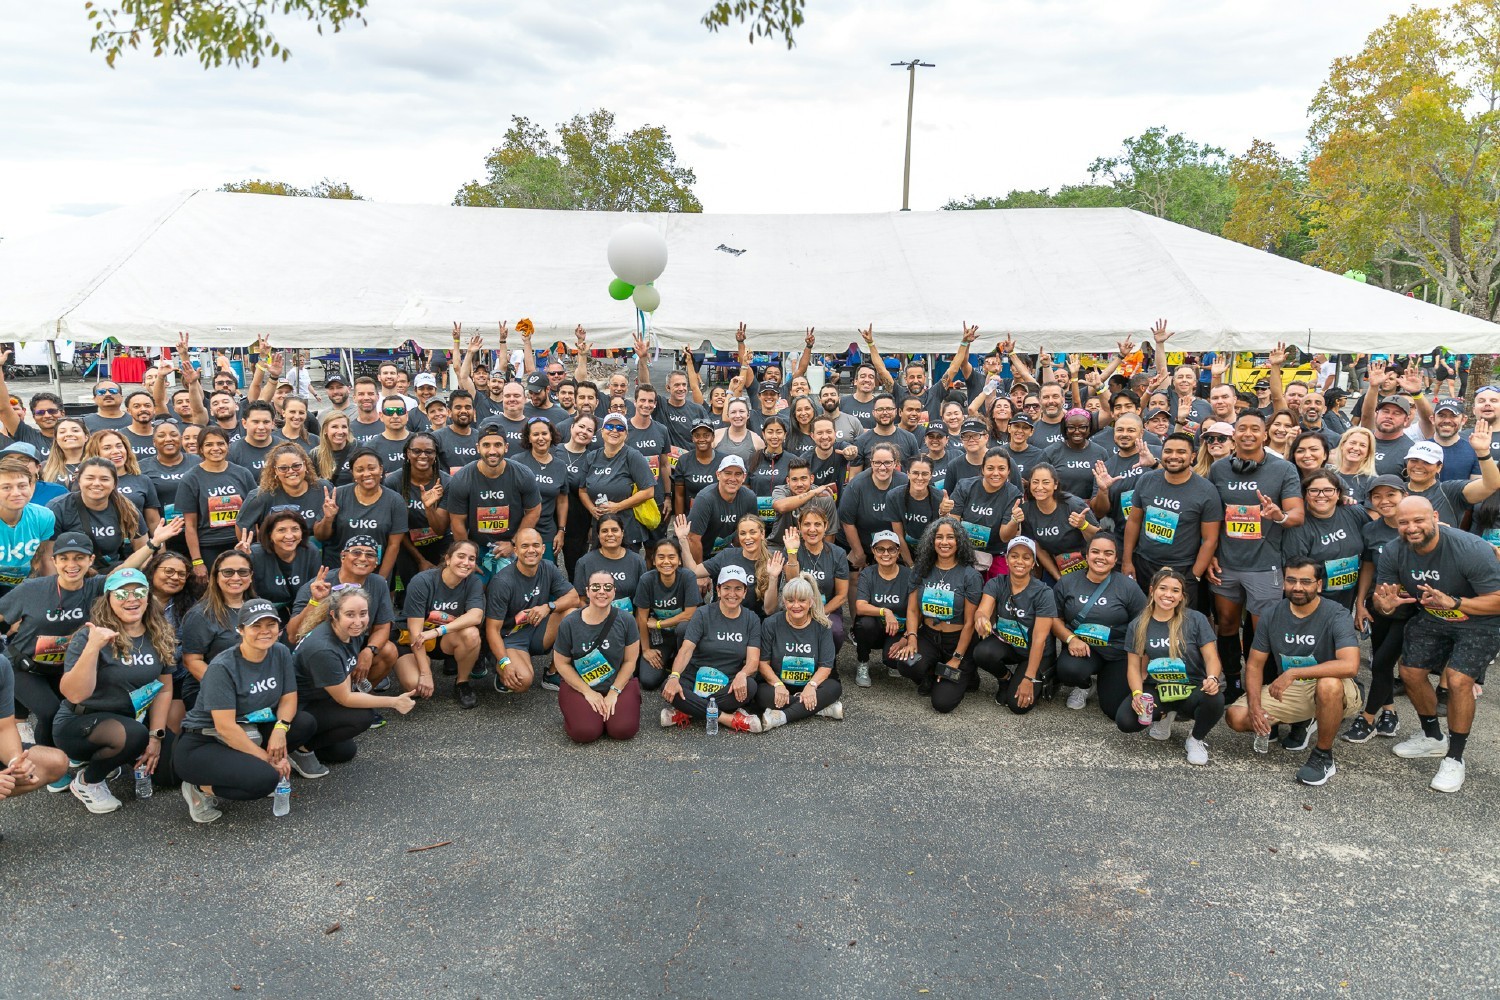 UKG always shows up in force at the annual Corporate Run 5K.